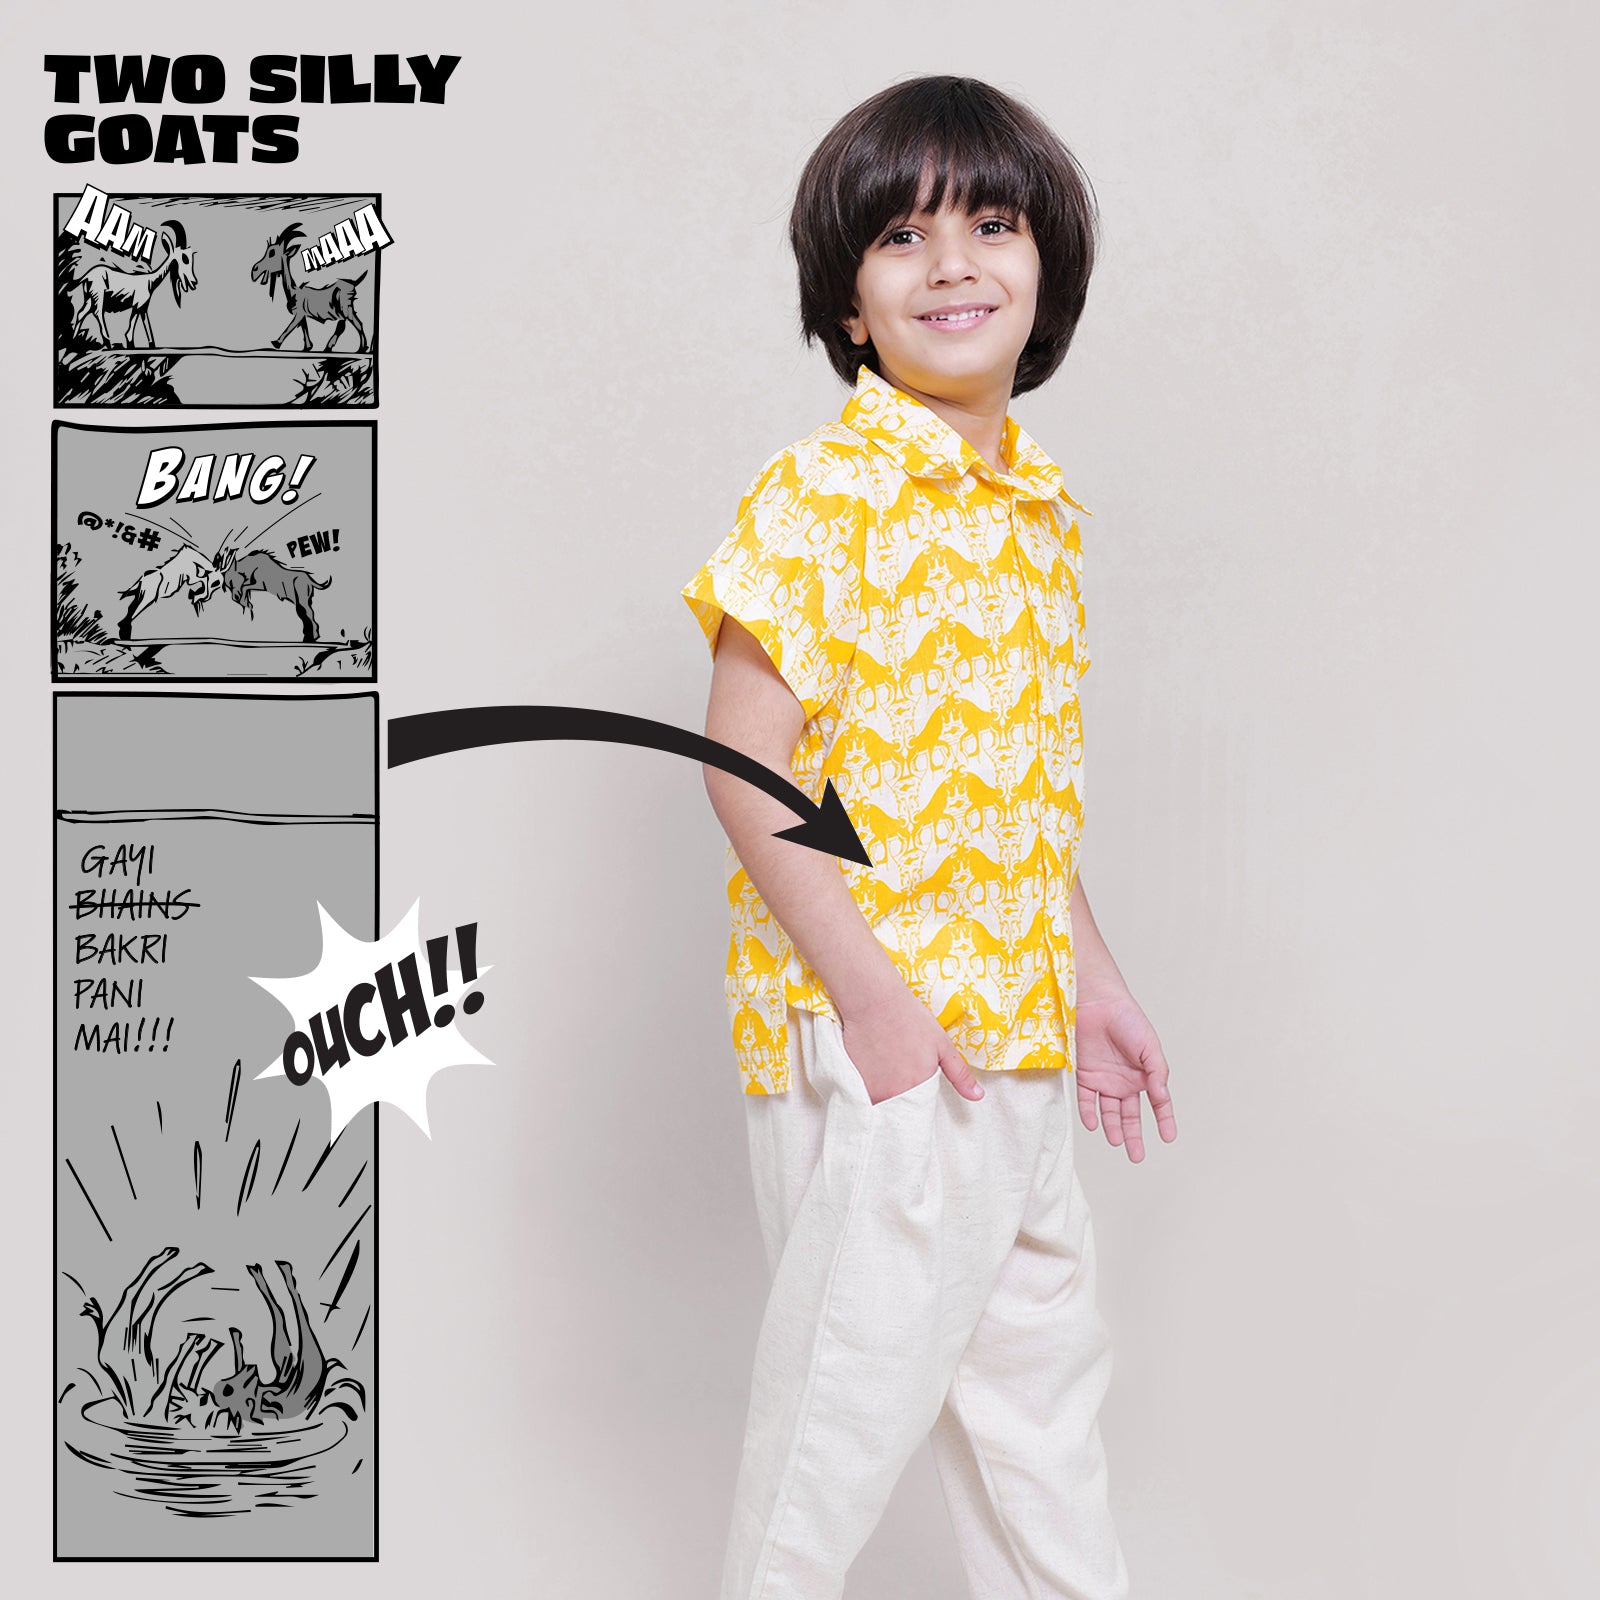 Cotton Casual Shirts For Boys with Two Silly Goats Print